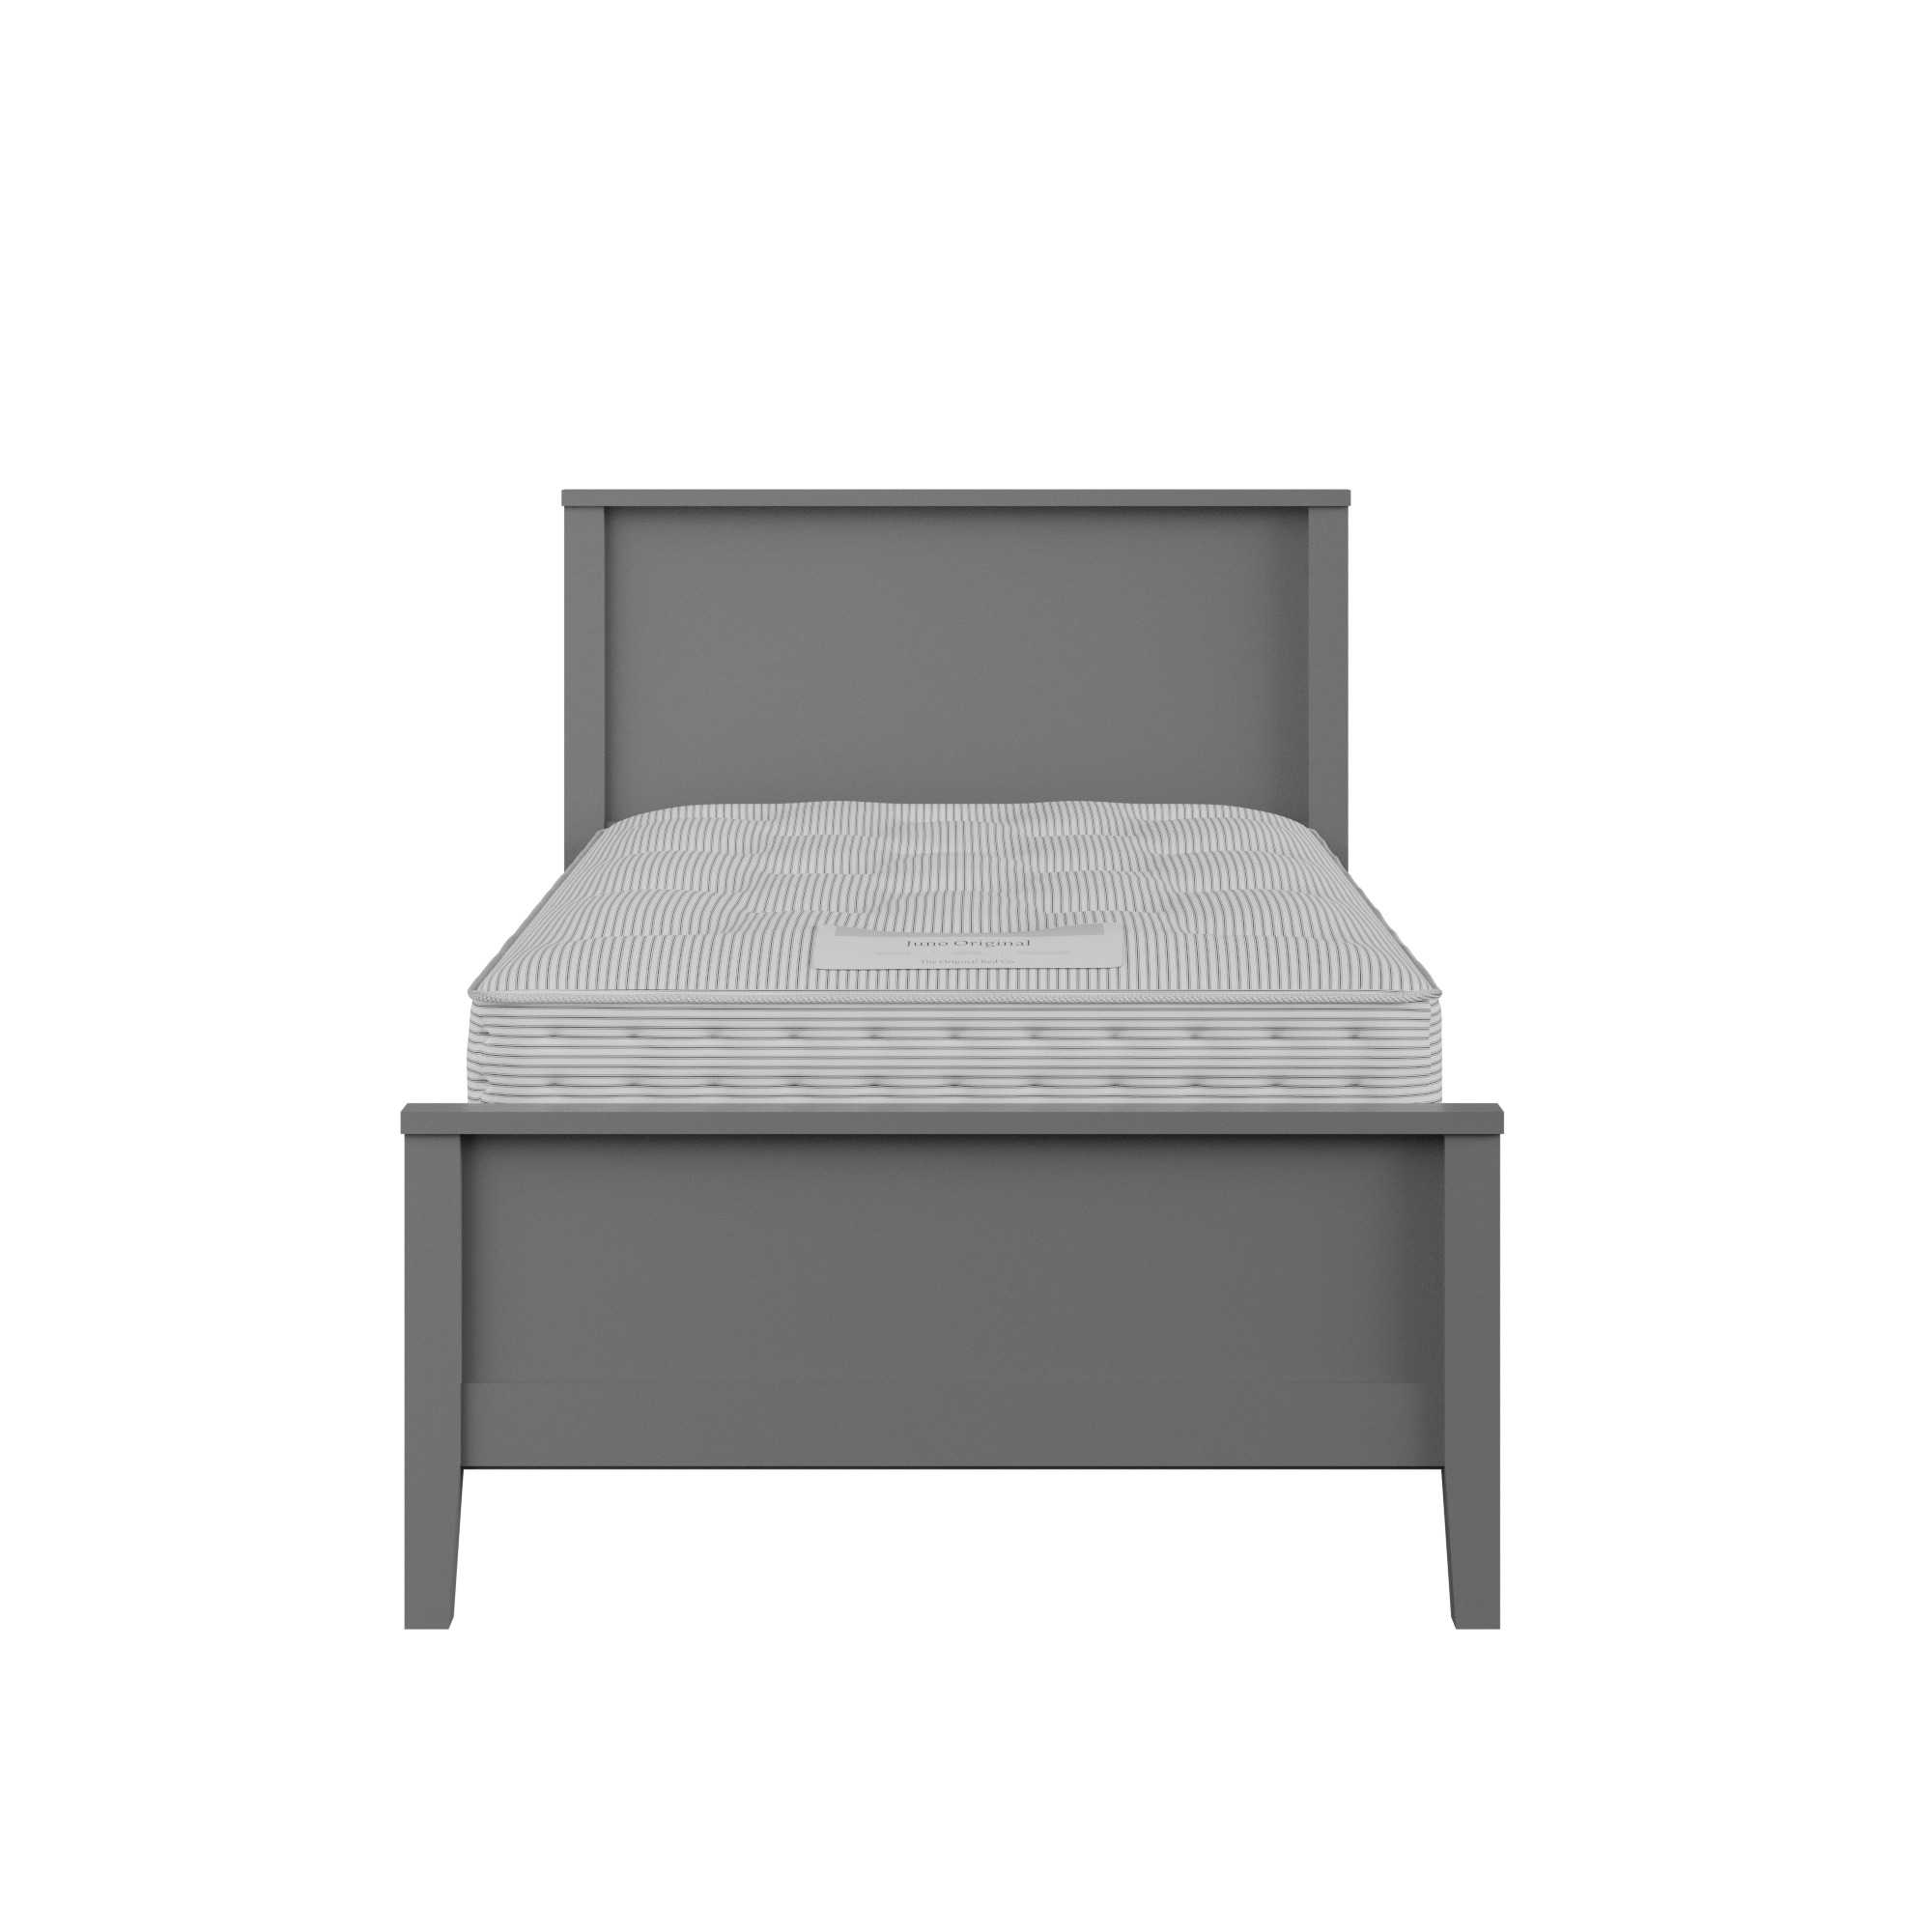 Ramsay Painted single painted wood bed in grey with Juno mattress